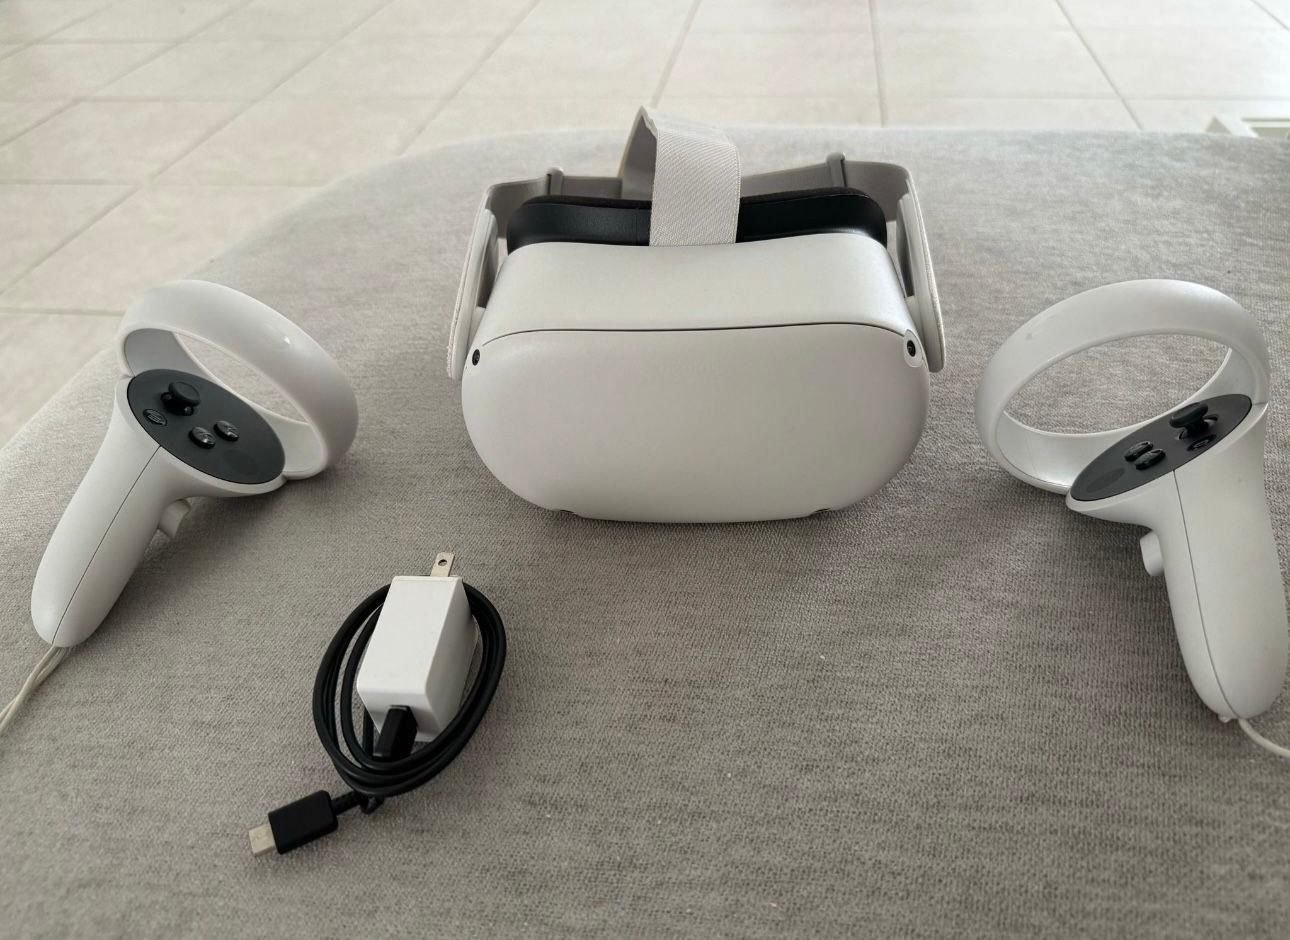 Meta Quest 2: All-In-One Wireless VR Headset 